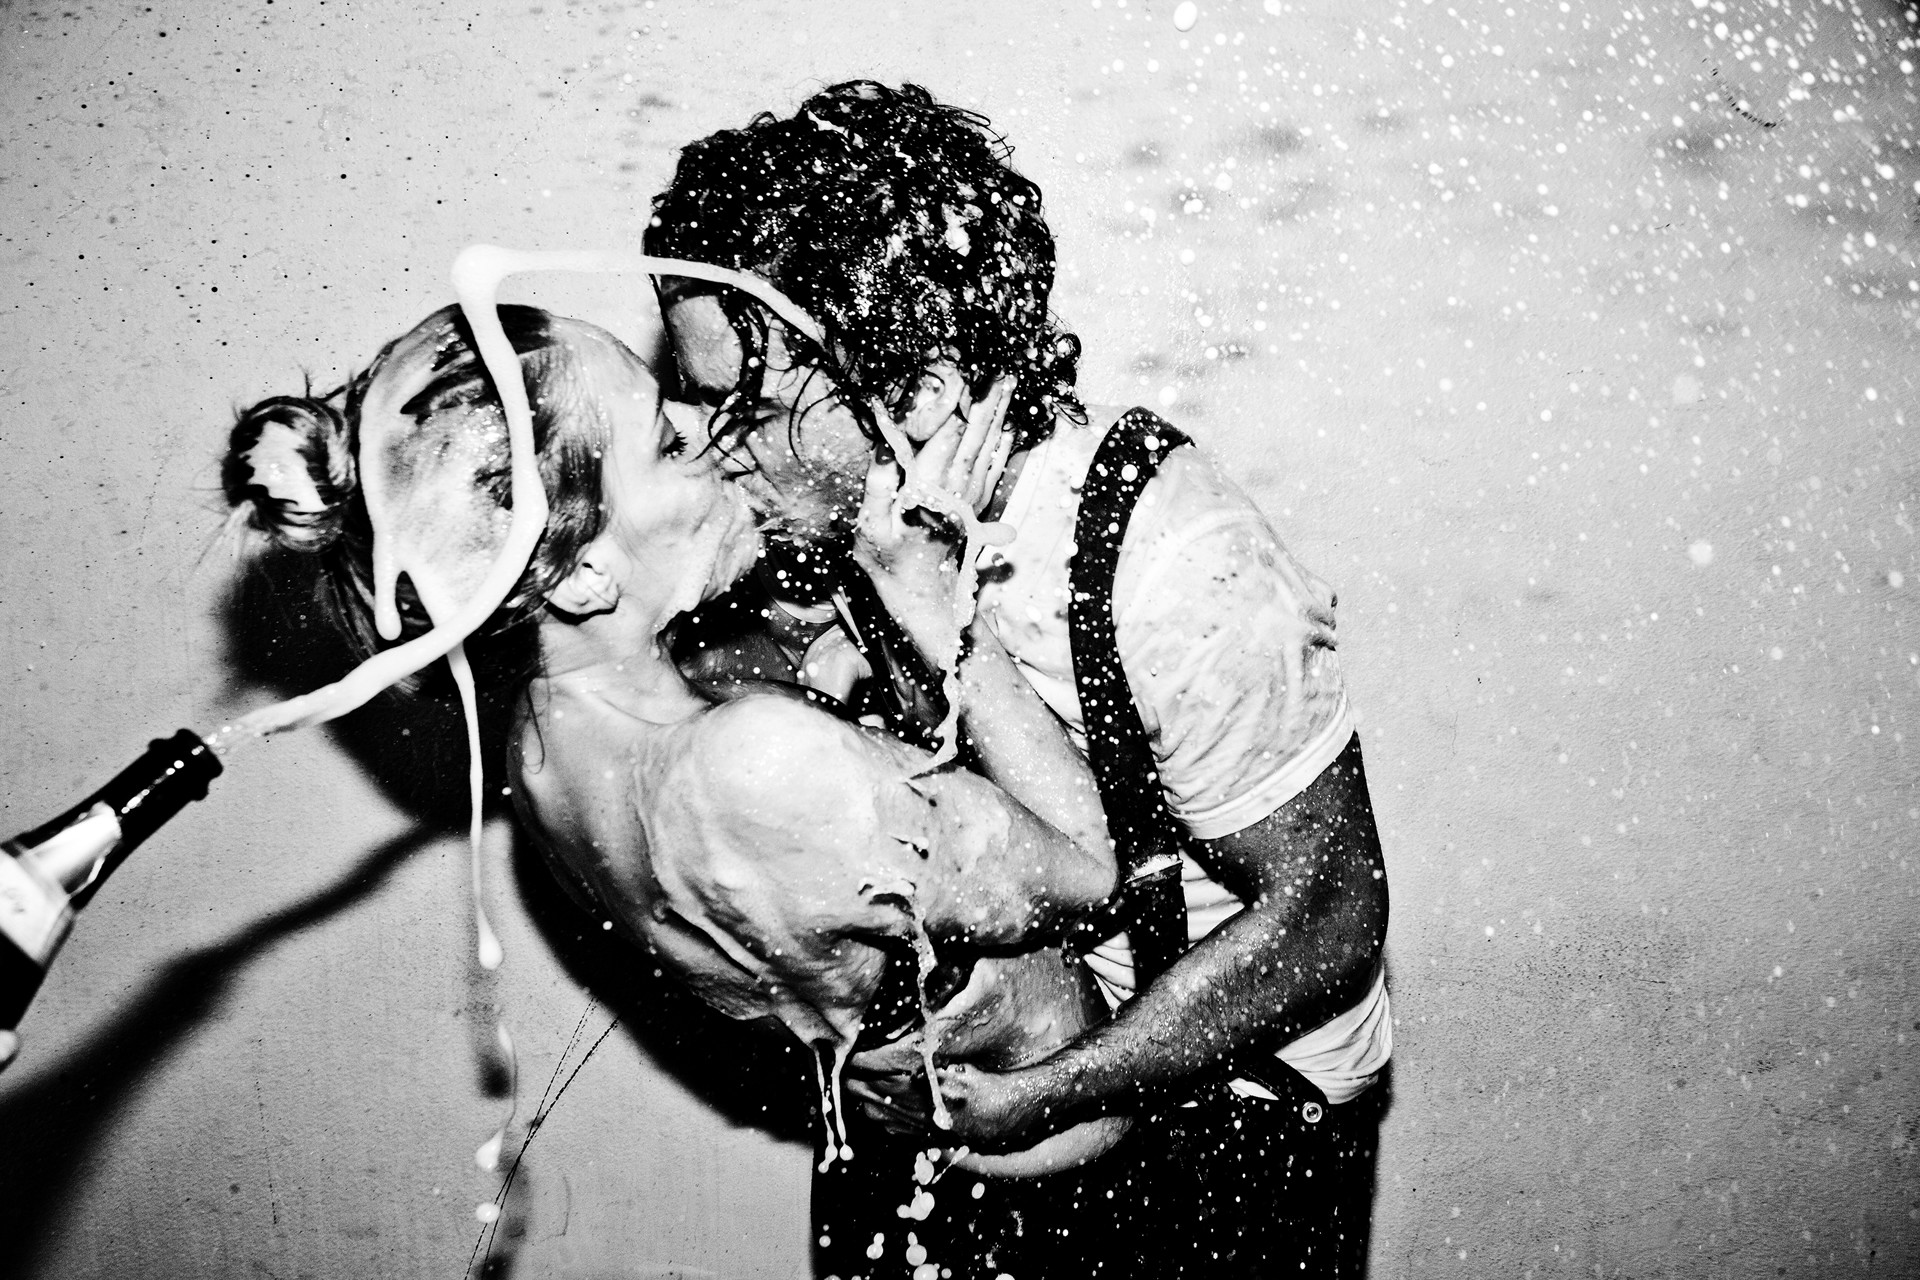 Champagne Kiss (Damaged - Needs to Be Destroyed) by Tyler Shields